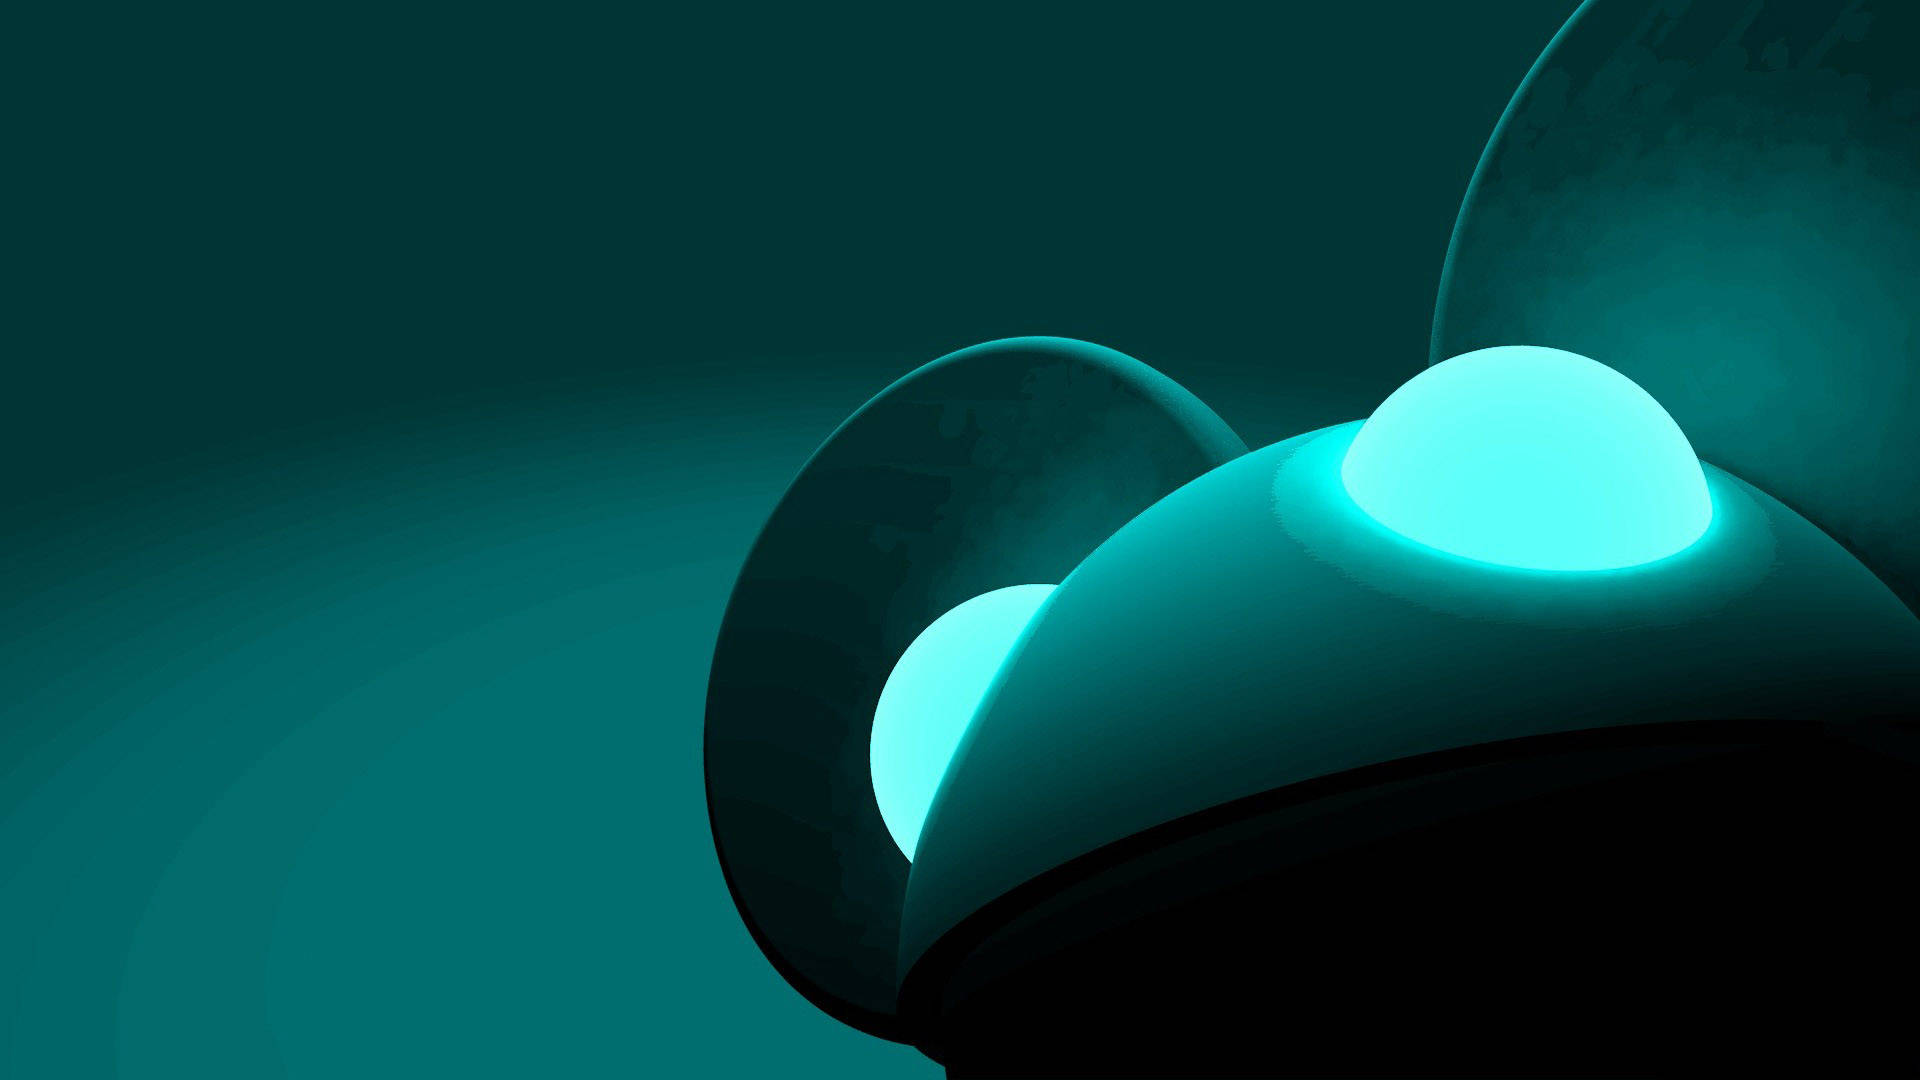 Cyan 3d Mouse Figure Background